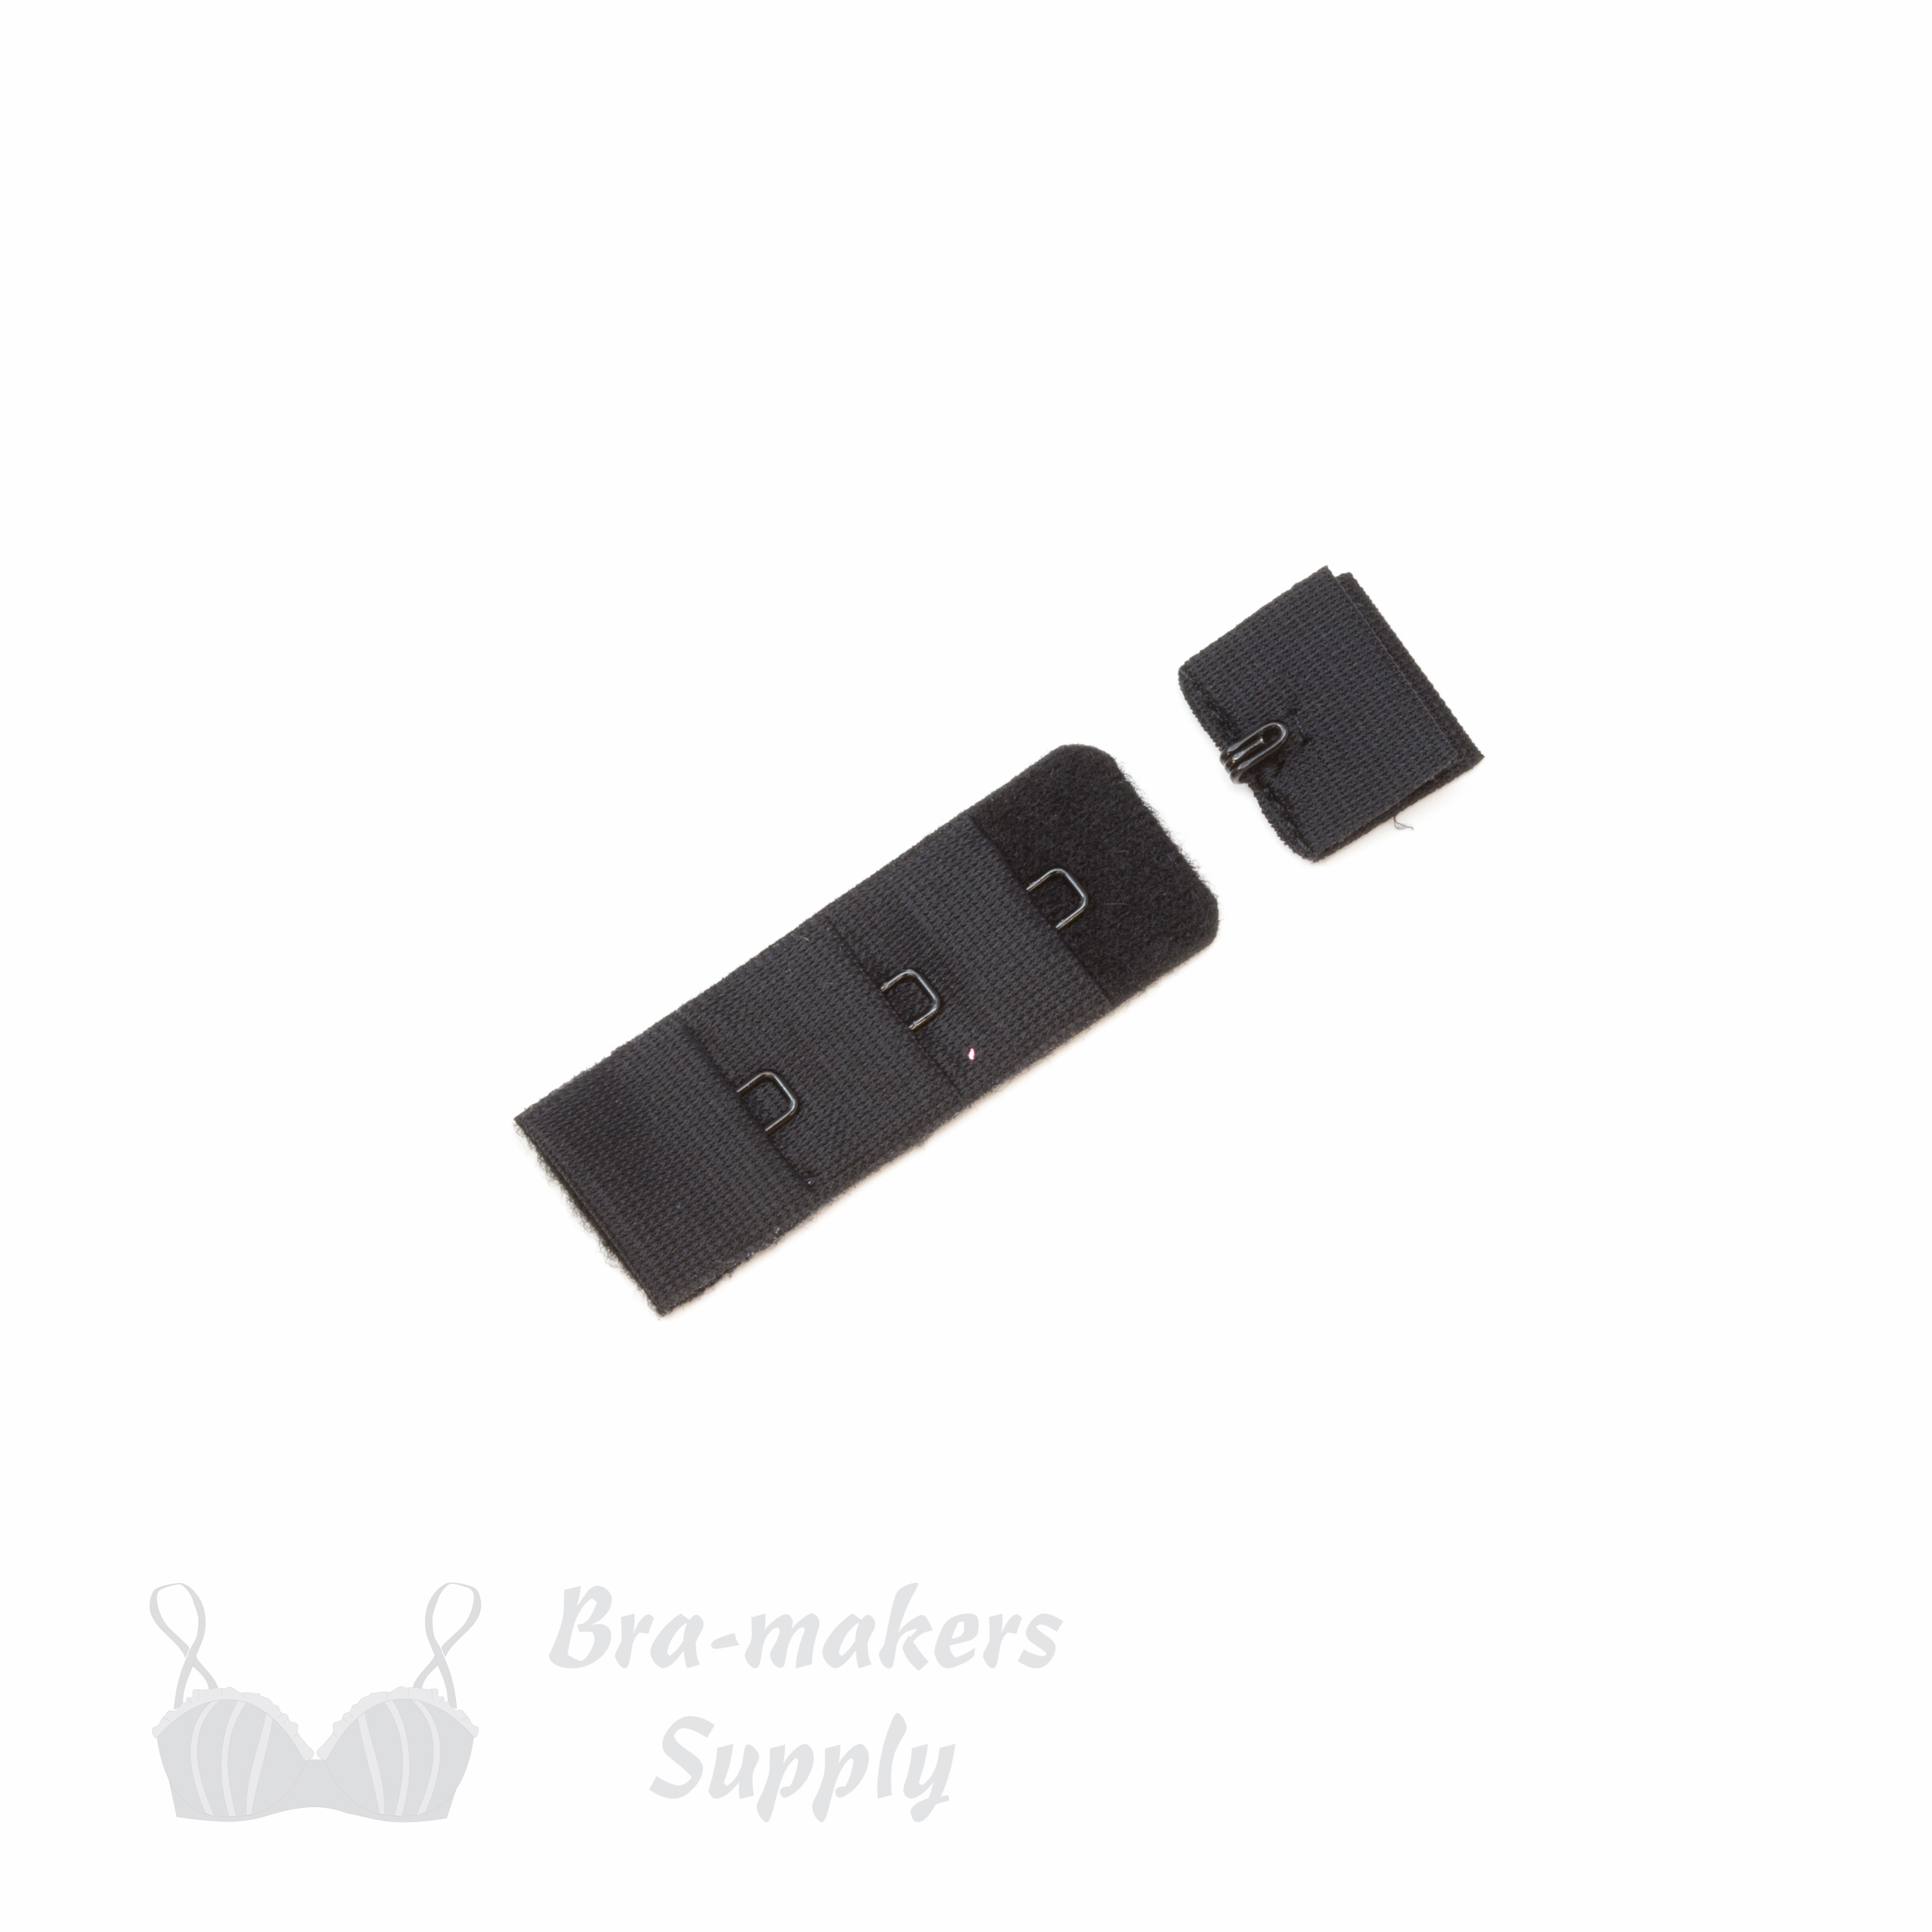 Black Bra Making Replacement Hook and Eye Tape Closures - 3 Rows - 2 1/4  Wide - Lingerie Design, DIY Bra Supplies (HE133)